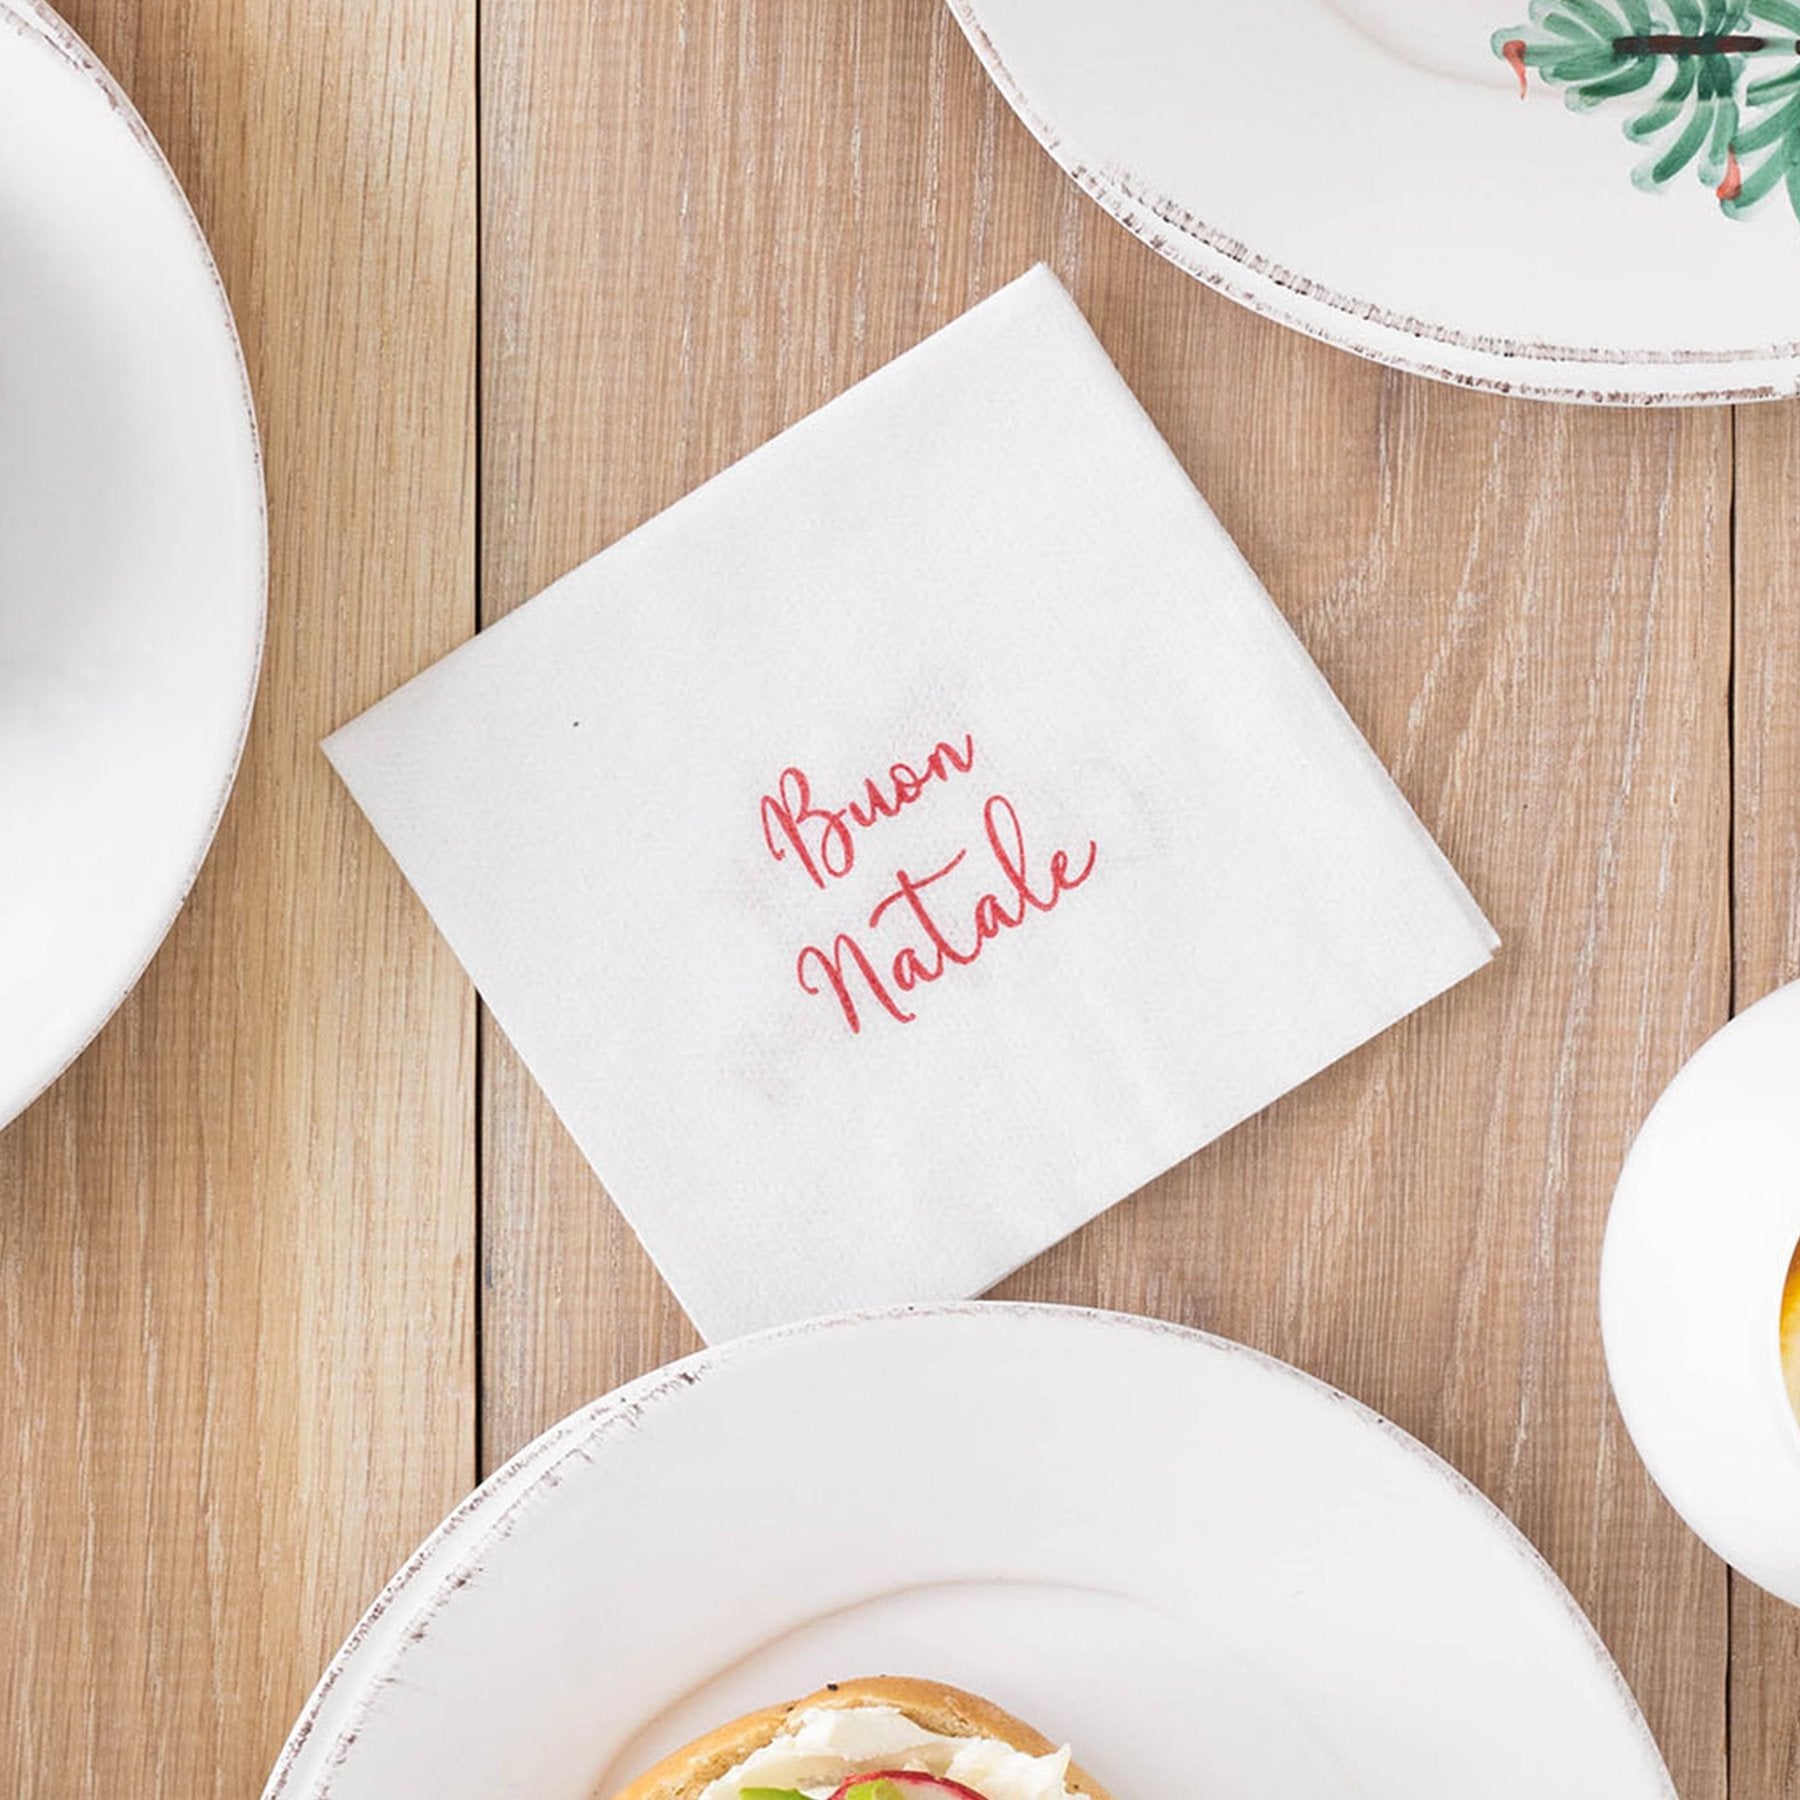 Papersoft Napkins Merry Christmas/ Buon Natale Cocktail Napkins - Pack of 20